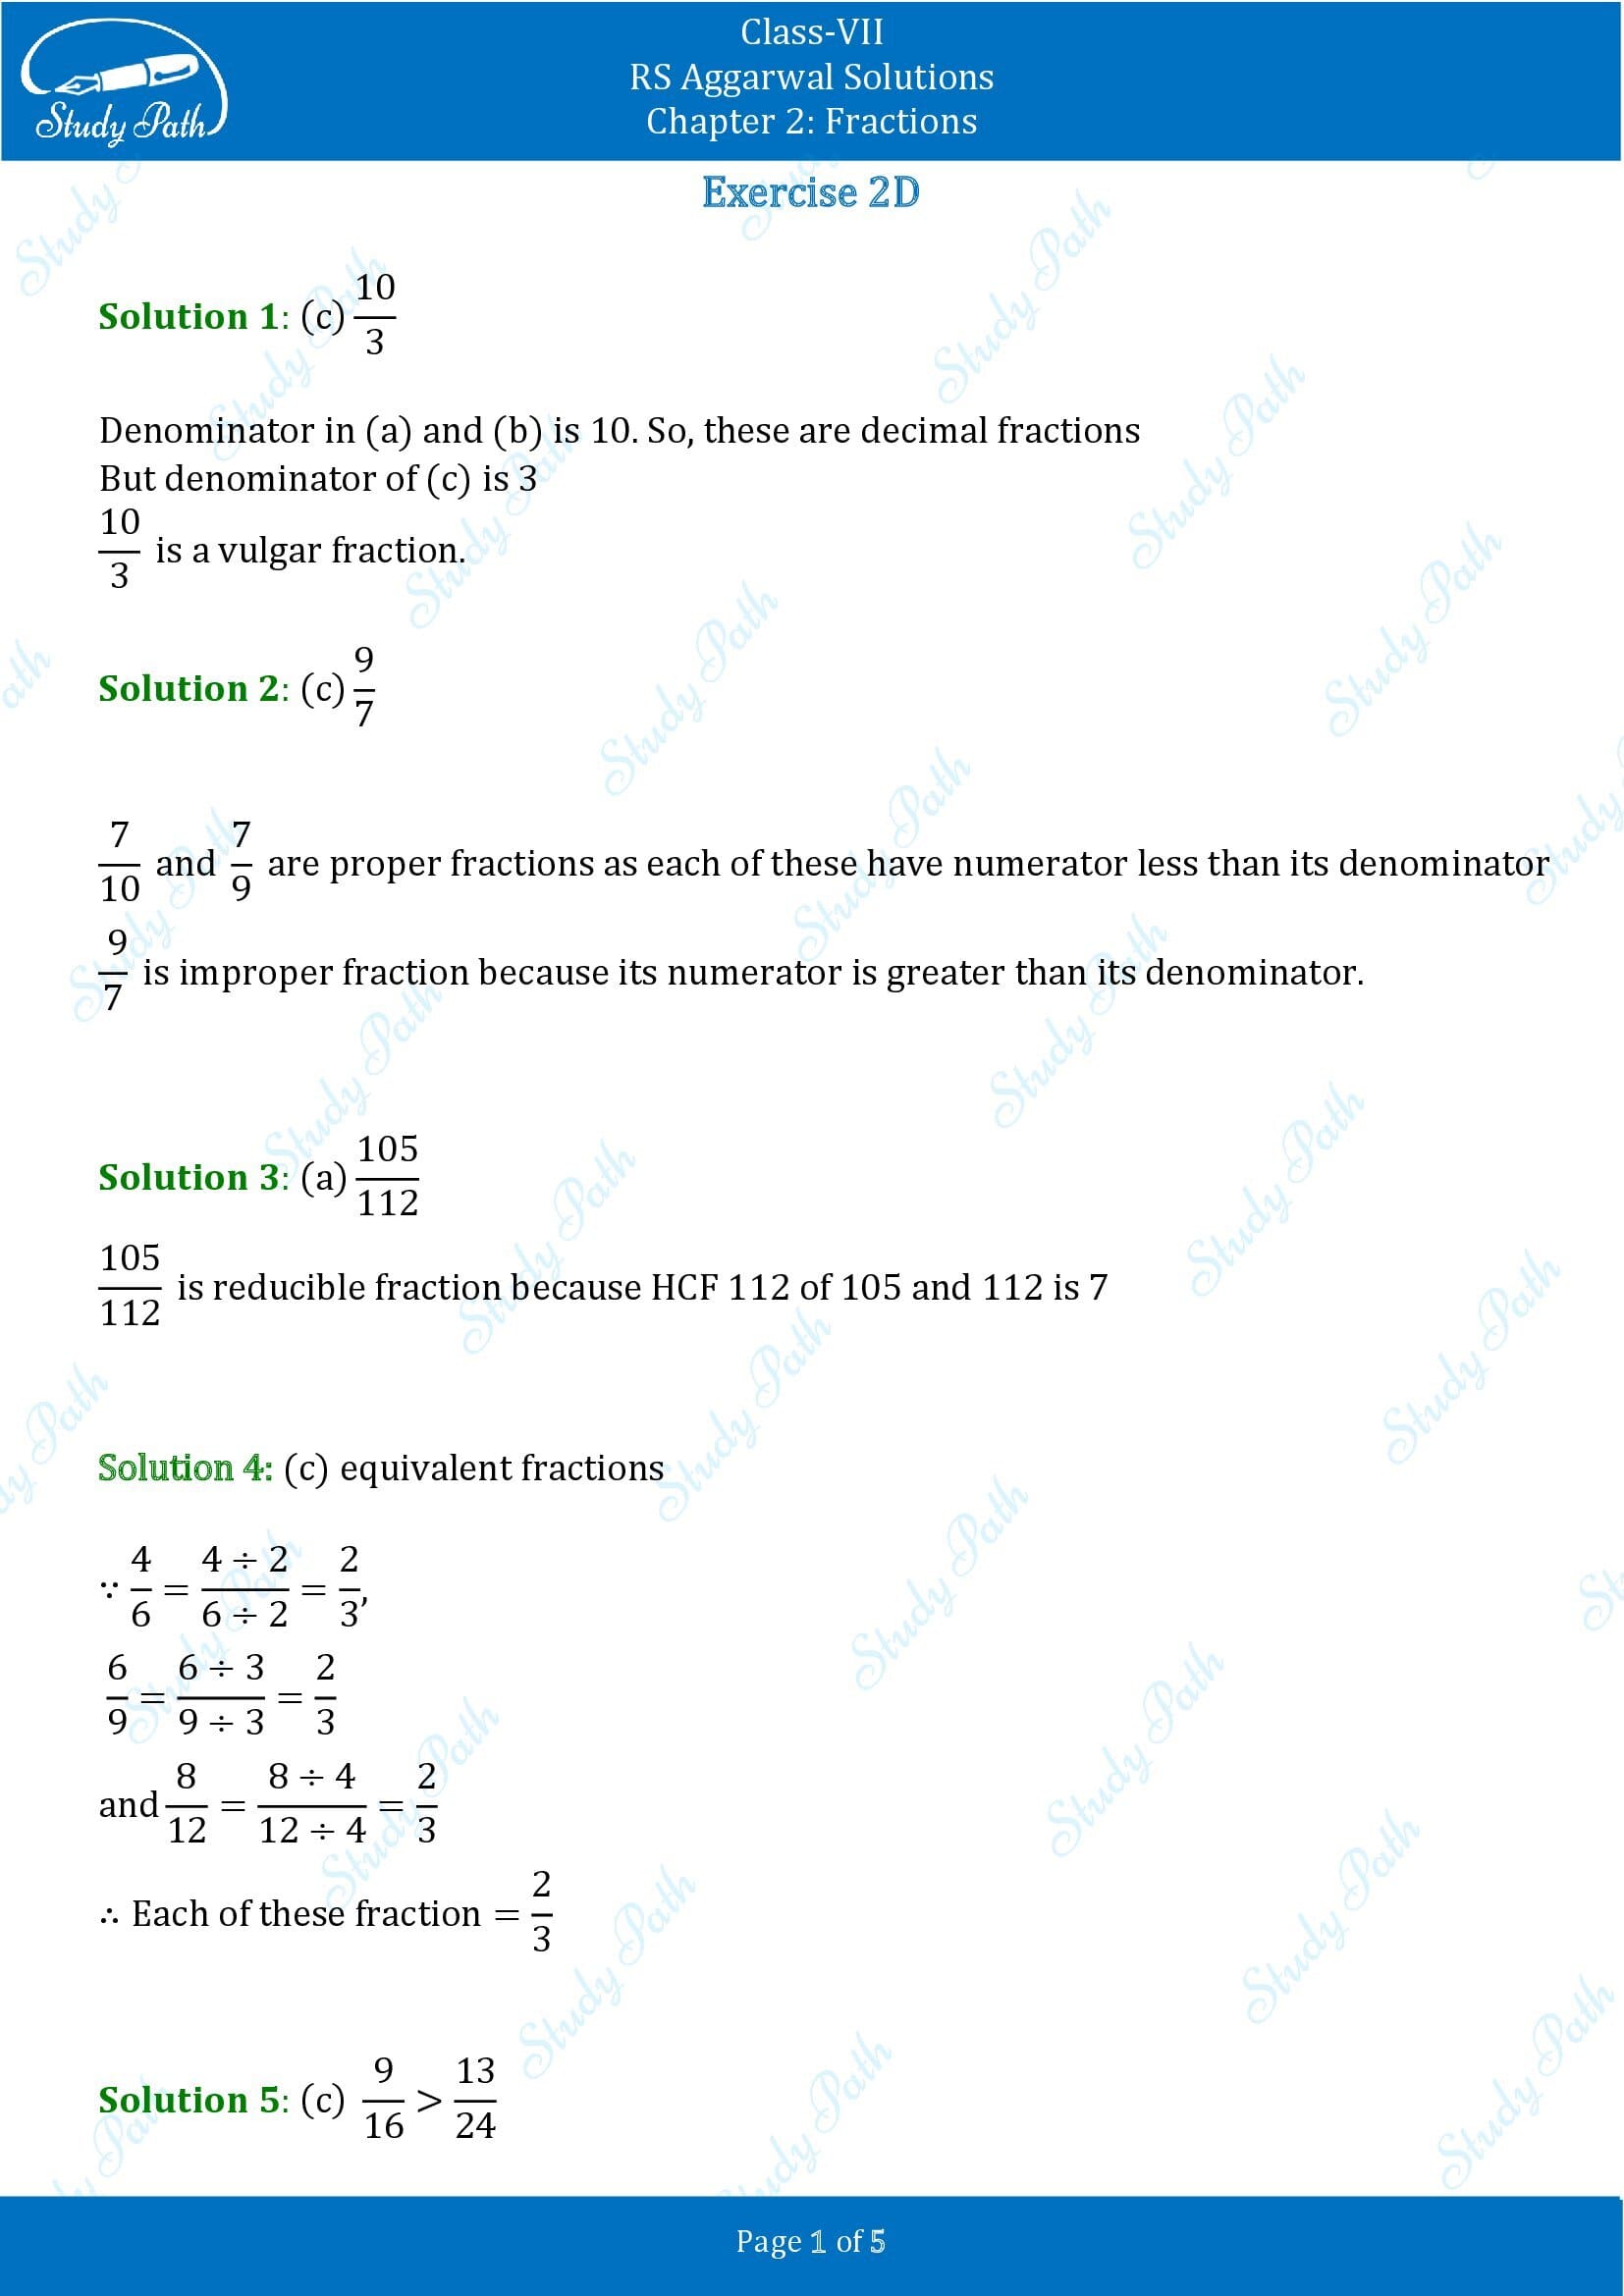 RS Aggarwal Solutions Class 7 Chapter 2 Fractions Exercise 2D MCQs 0001